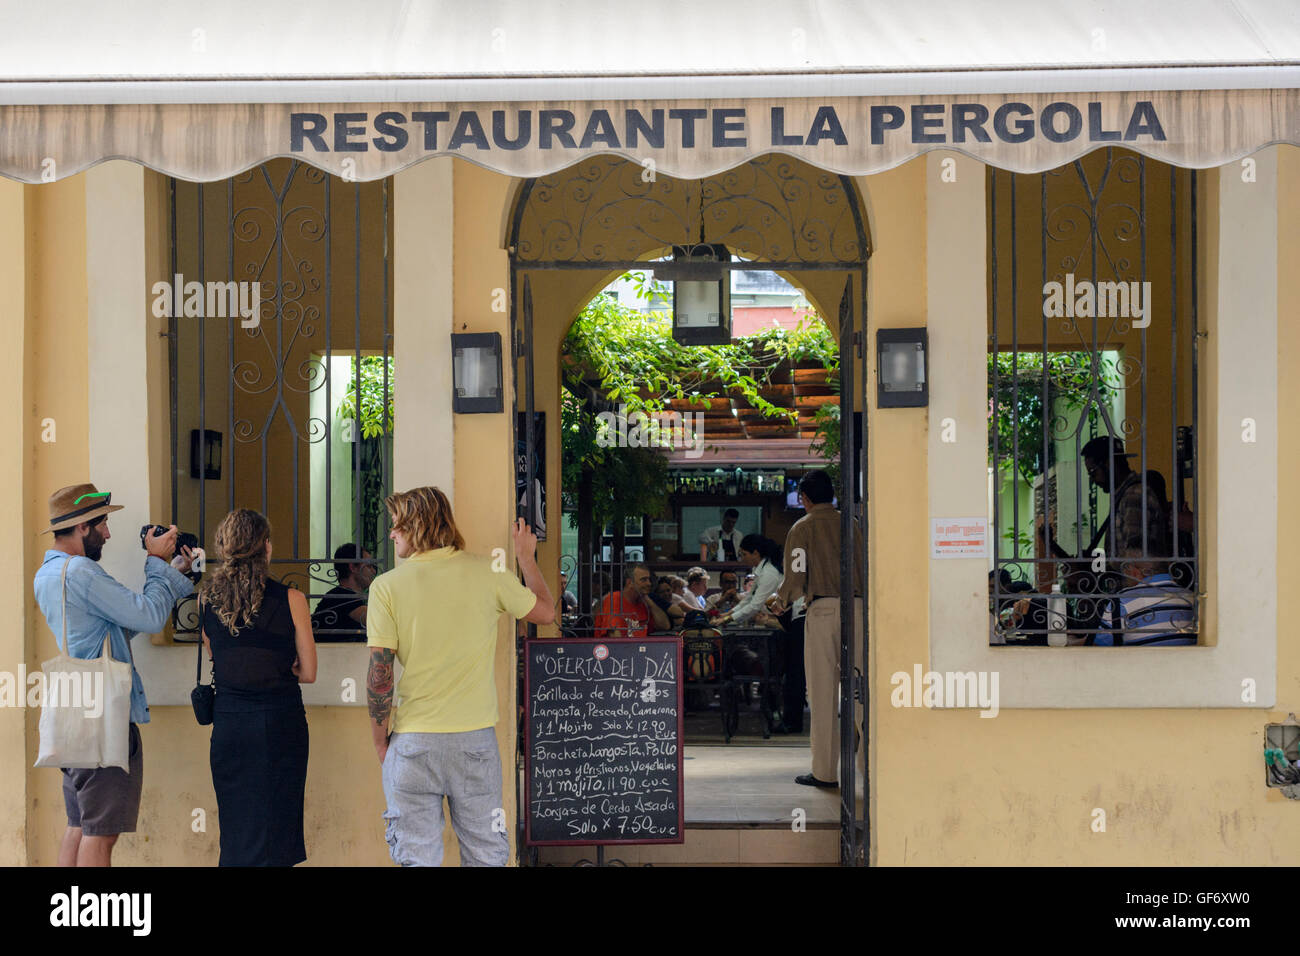 Restaurant Pergola High Resolution Stock Photography and Images - Alamy